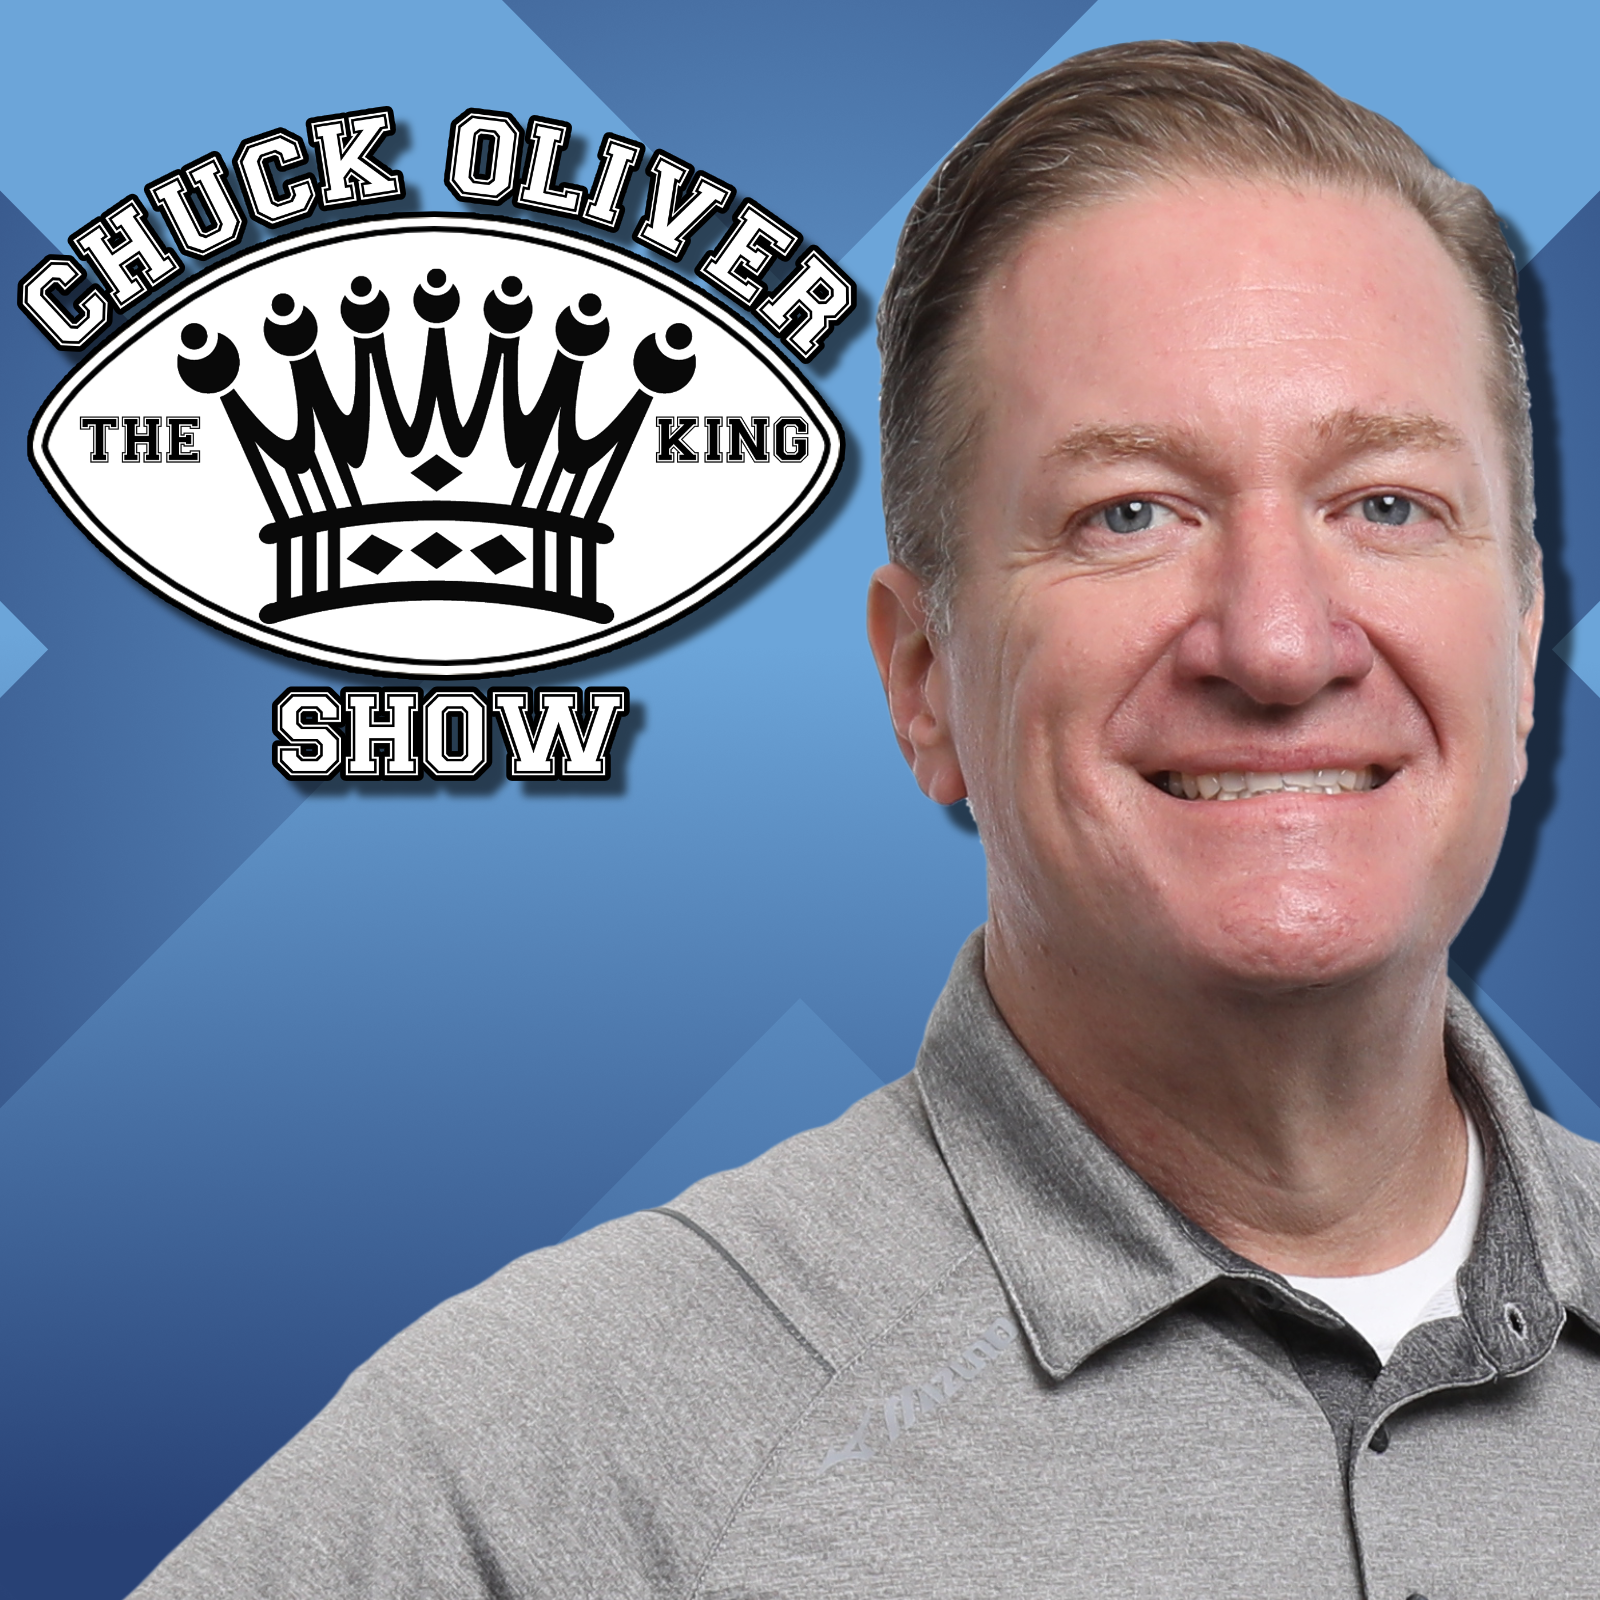 CHUCK OLIVER SHOW 3-29 FRIDAY HOUR 2